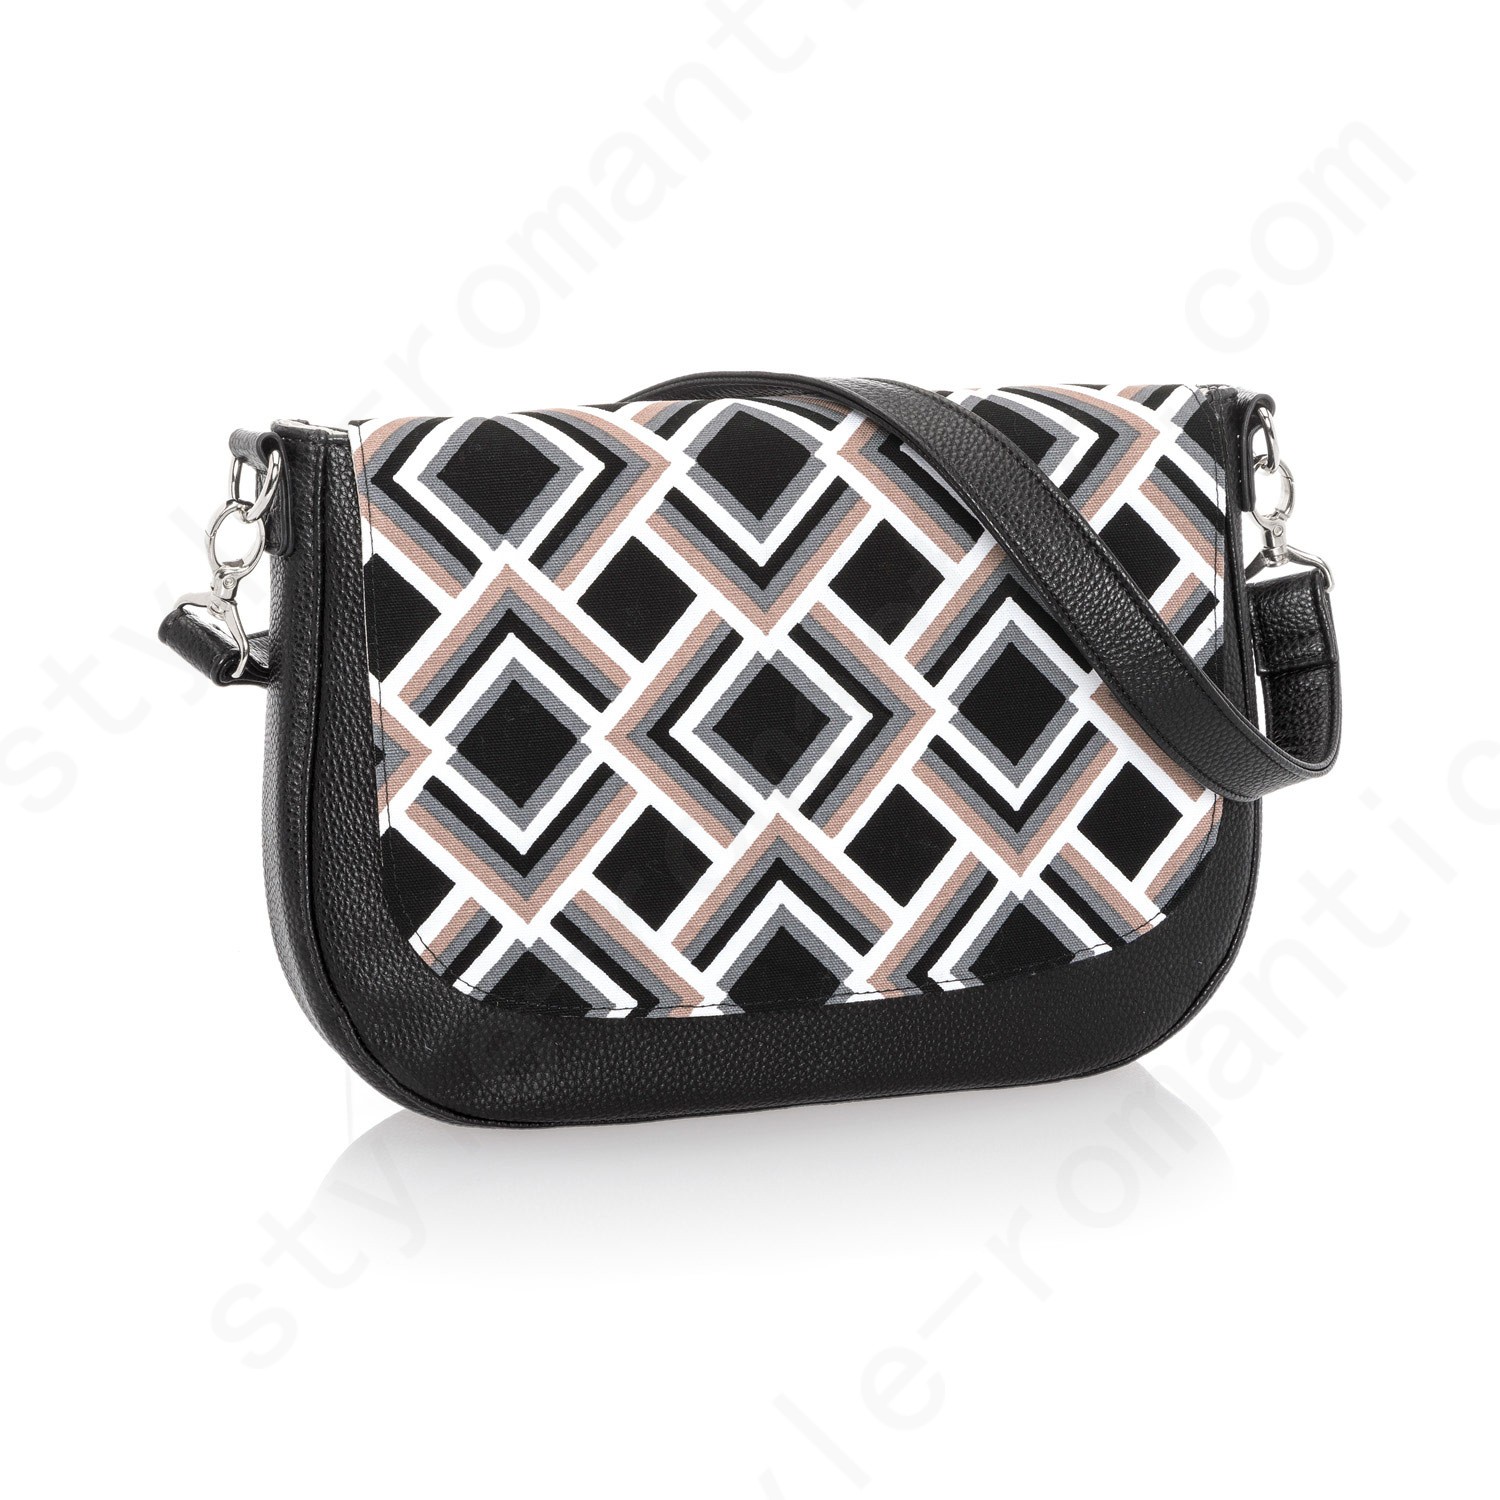 Thirty-One Gifts Studio Thirty-One Classic - Black Beauty Pebble W/ Deco Diamond Bags Accessories - Thirty-One Gifts Studio Thirty-One Classic - Black Beauty Pebble W/ Deco Diamond Bags Accessories